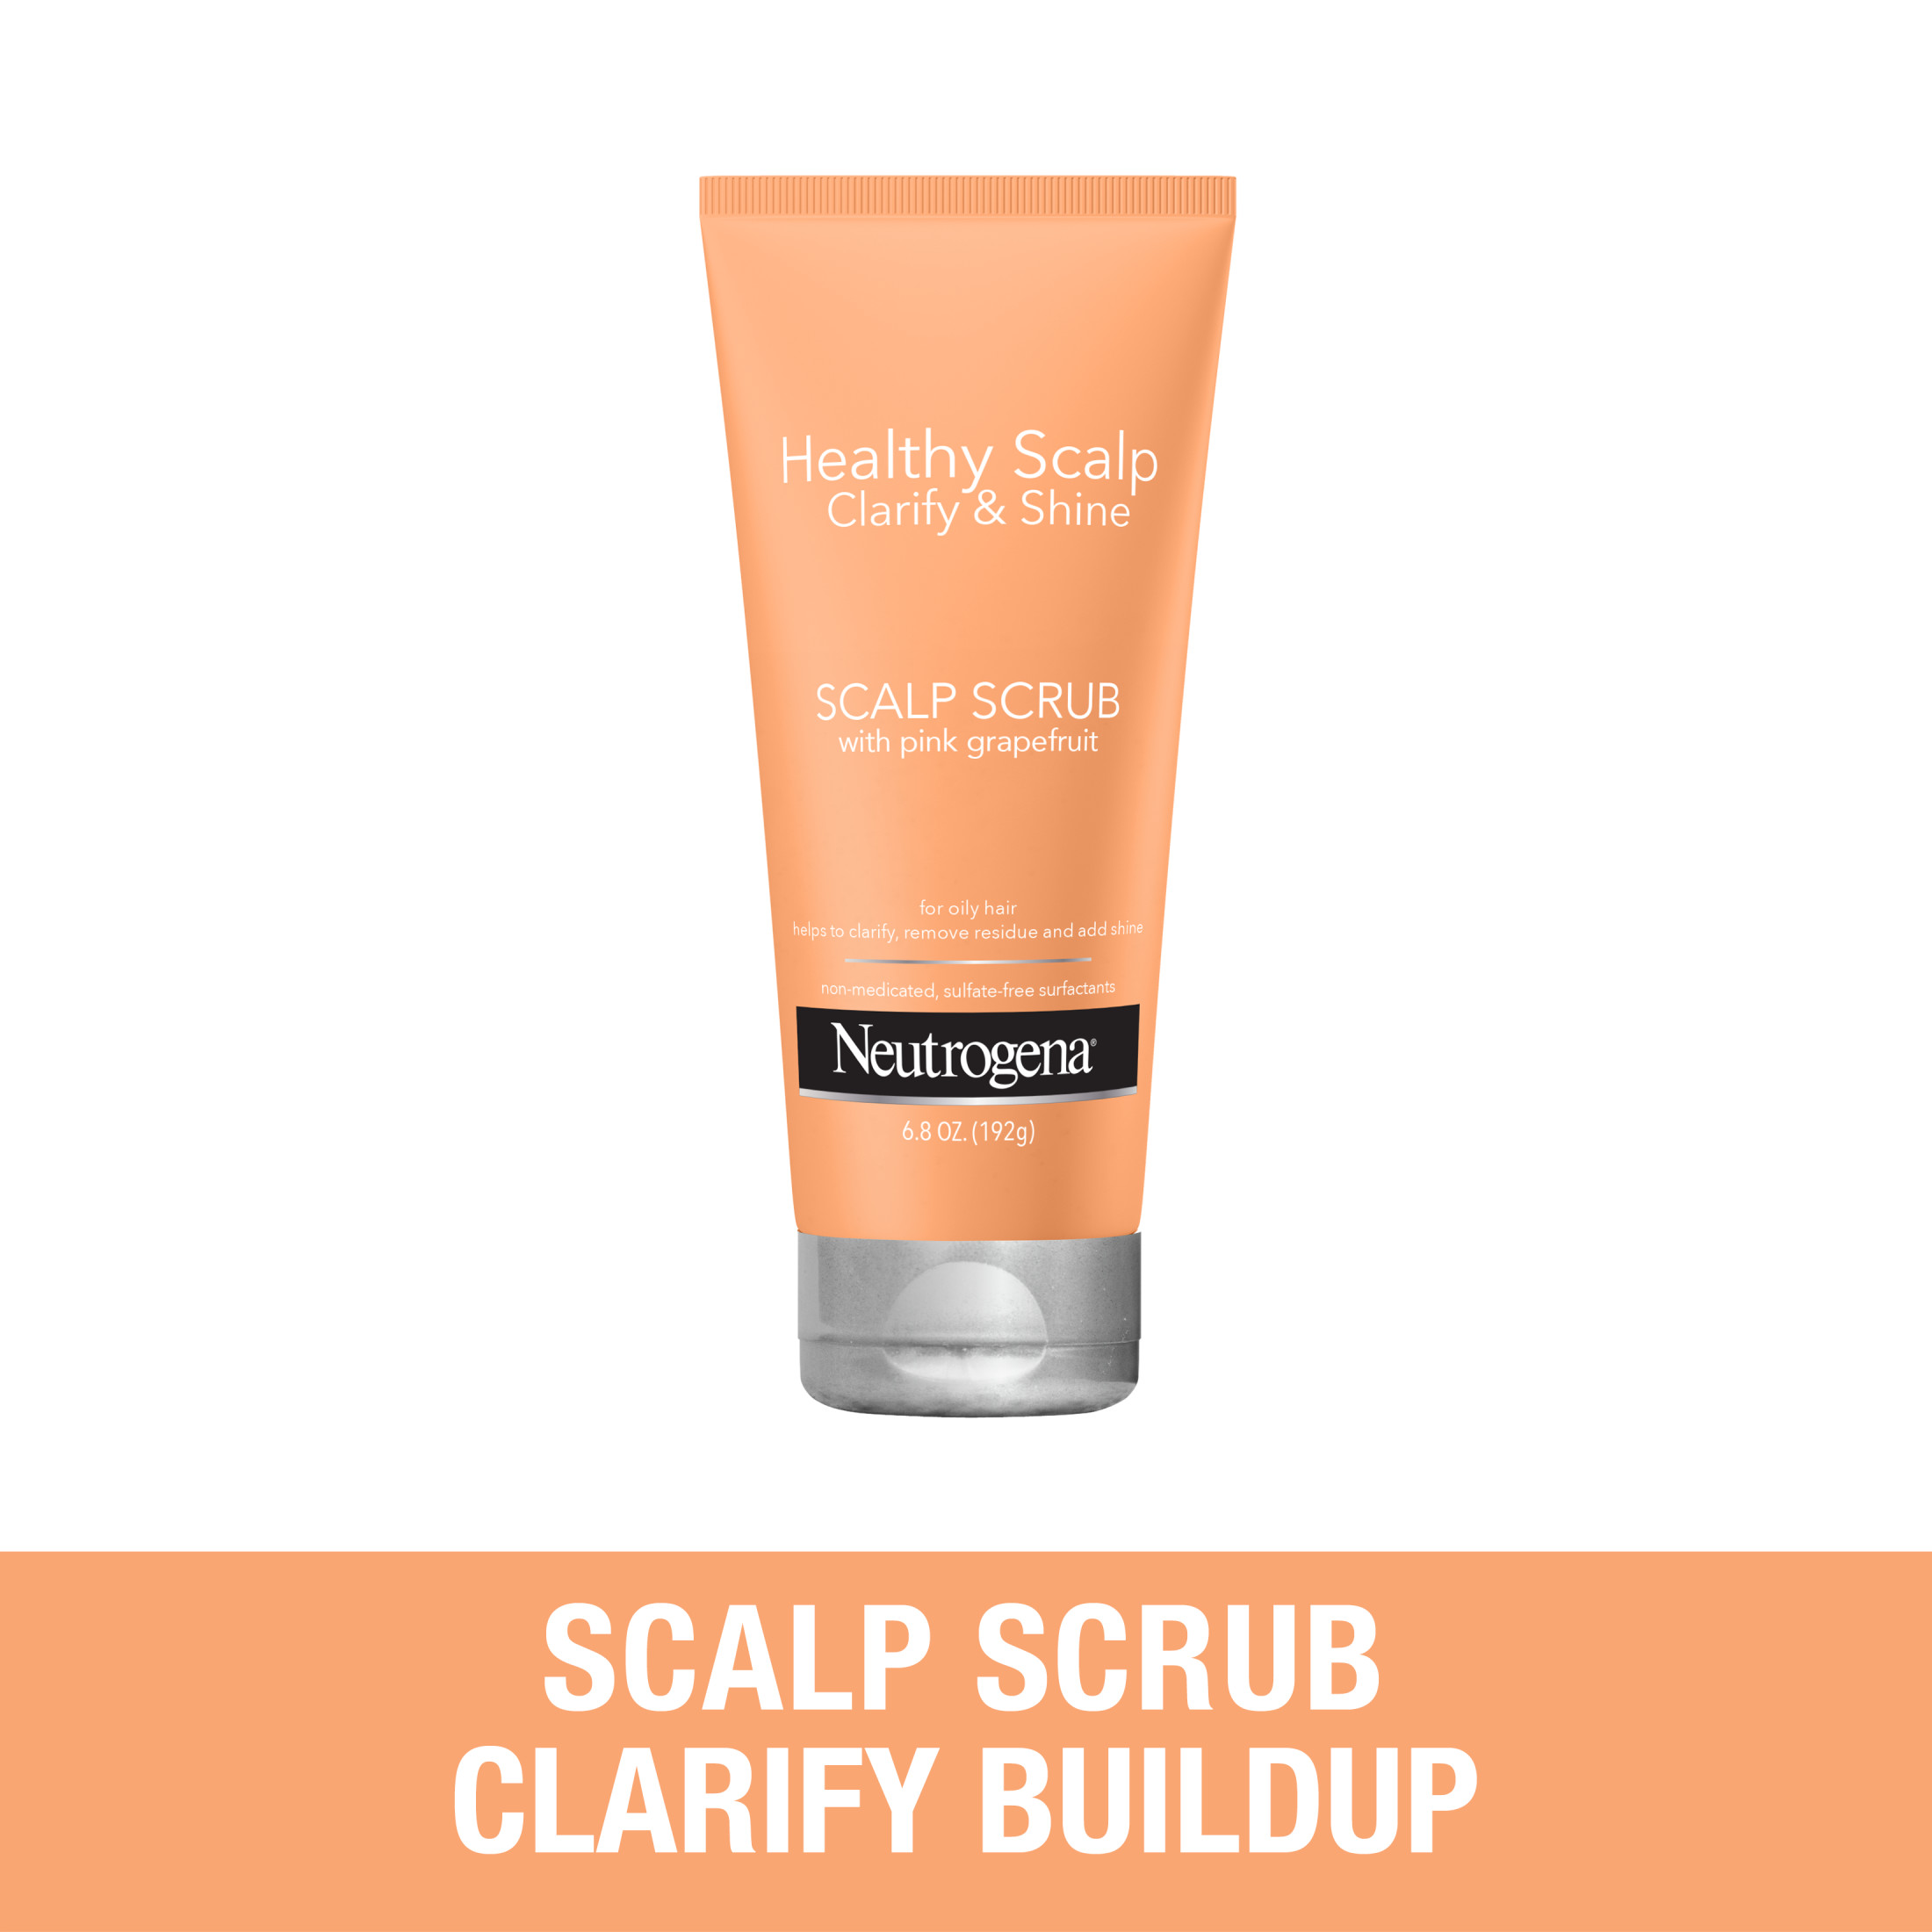 Neutrogena Healthy Scalp Clarify and Shine Scalp Scrub with Pink Grapefruit, for Exfoliating, Clarifying, Cleaner Hair, Hair Mask, Vitamin C, 6.8 fl. oz. - image 2 of 10